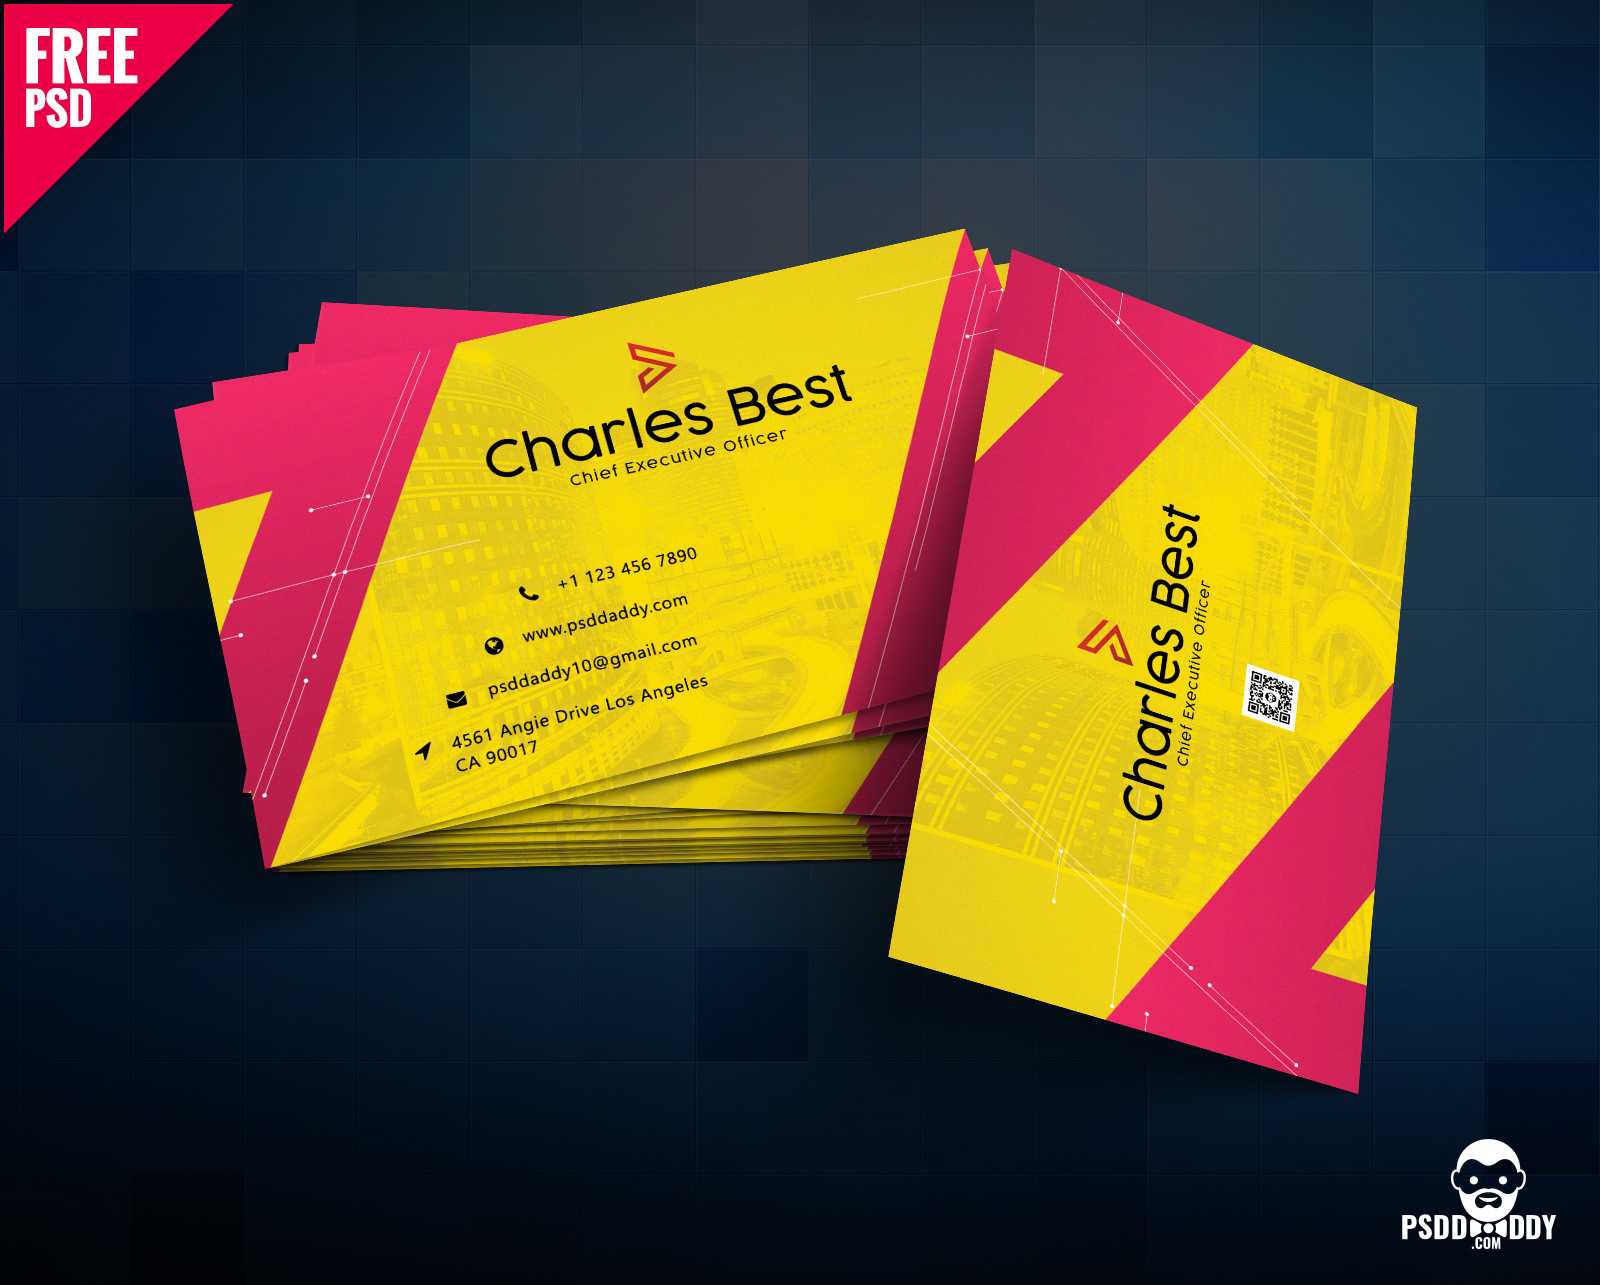 Download] Creative Business Card Free Psd | Psddaddy Intended For Business Card Size Photoshop Template